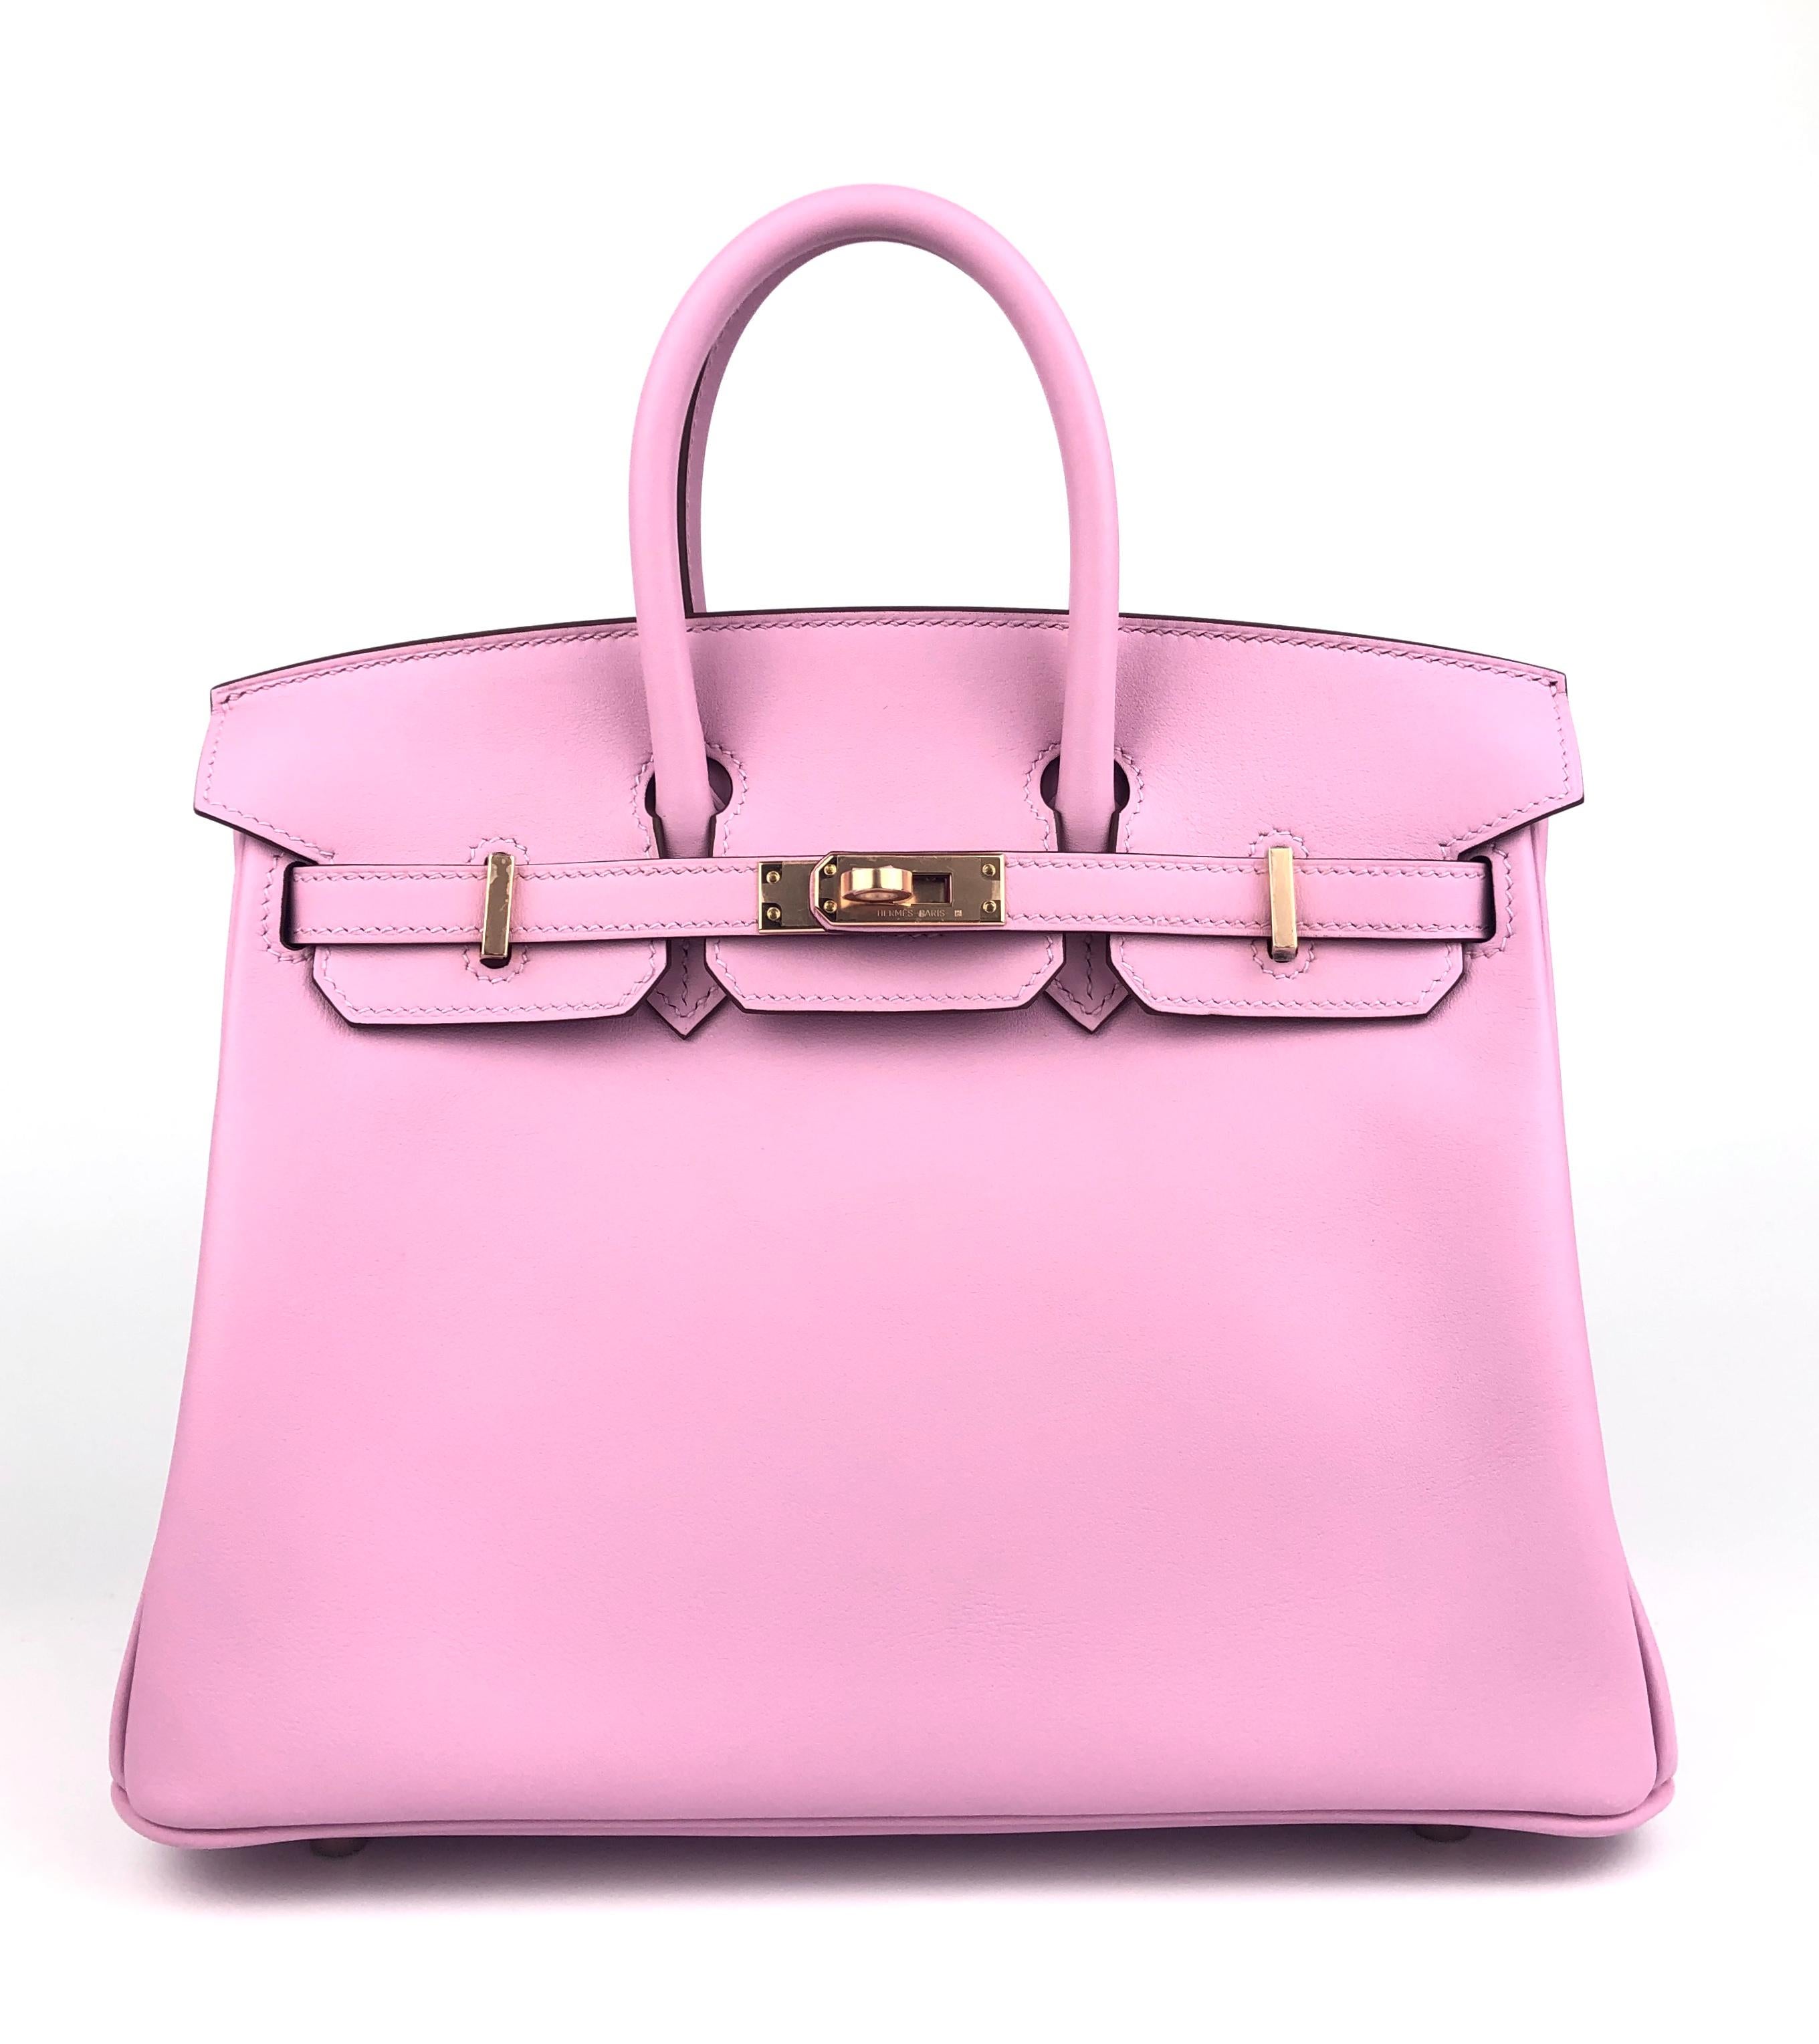 Ultra Rare and most coveted color. Brand New 2022 Hermes Birkin 25 Mauve Sylvester Pink Leather complimented by Rose Gold Hardware. U Stamp 2022. Includes all Accessories and Box.

Shop with Confidence from Lux Addicts. Authenticity Guaranteed!